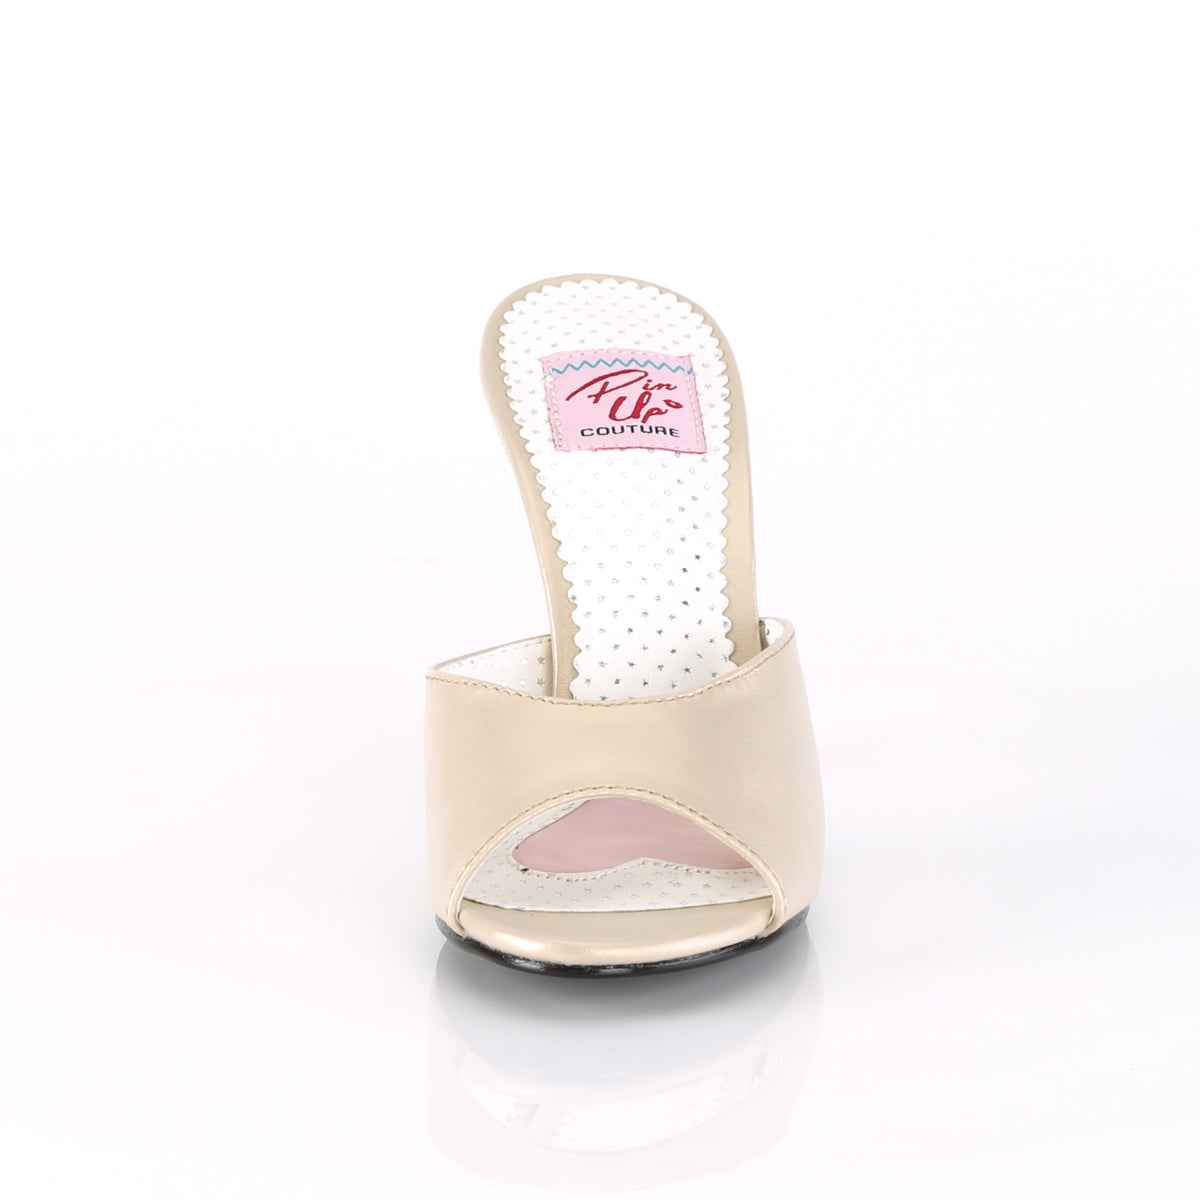 MONROE-05 Pin Up Couture Champagne Faux Leather Single Soles [Retro Glamour Shoes]